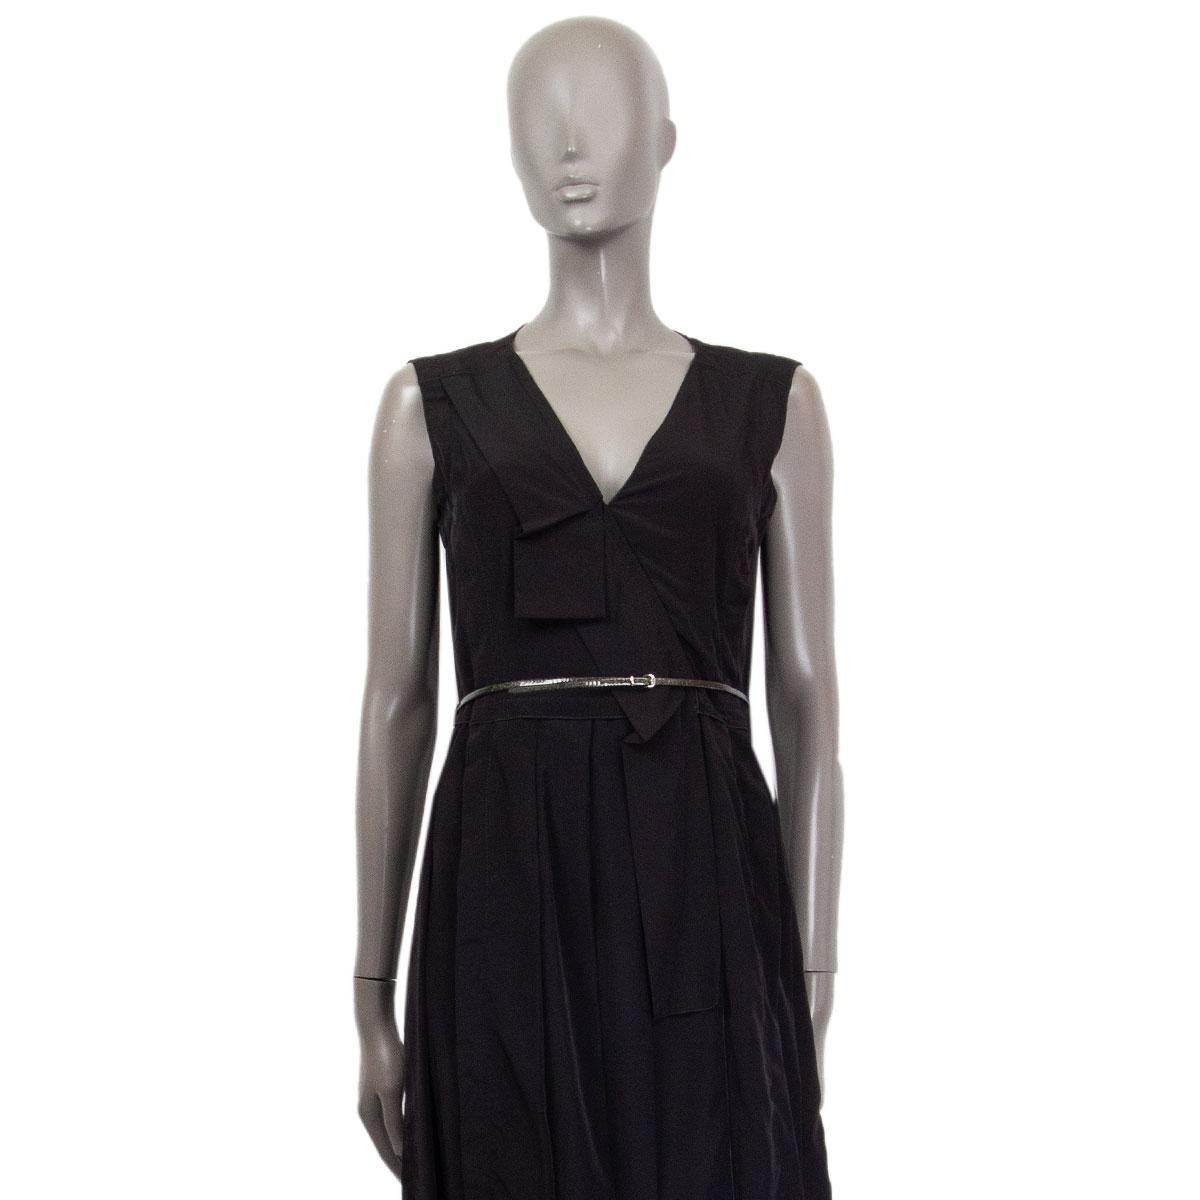 100% authentic Marc Jacobs v-neck pleated and ruched sleeveless dress in black polyester (100%). Lined in black silk (100%). Features a glitter gold-tone leather waist-belt and a slit at front. Opens with a concealed zipper on the back. Has been